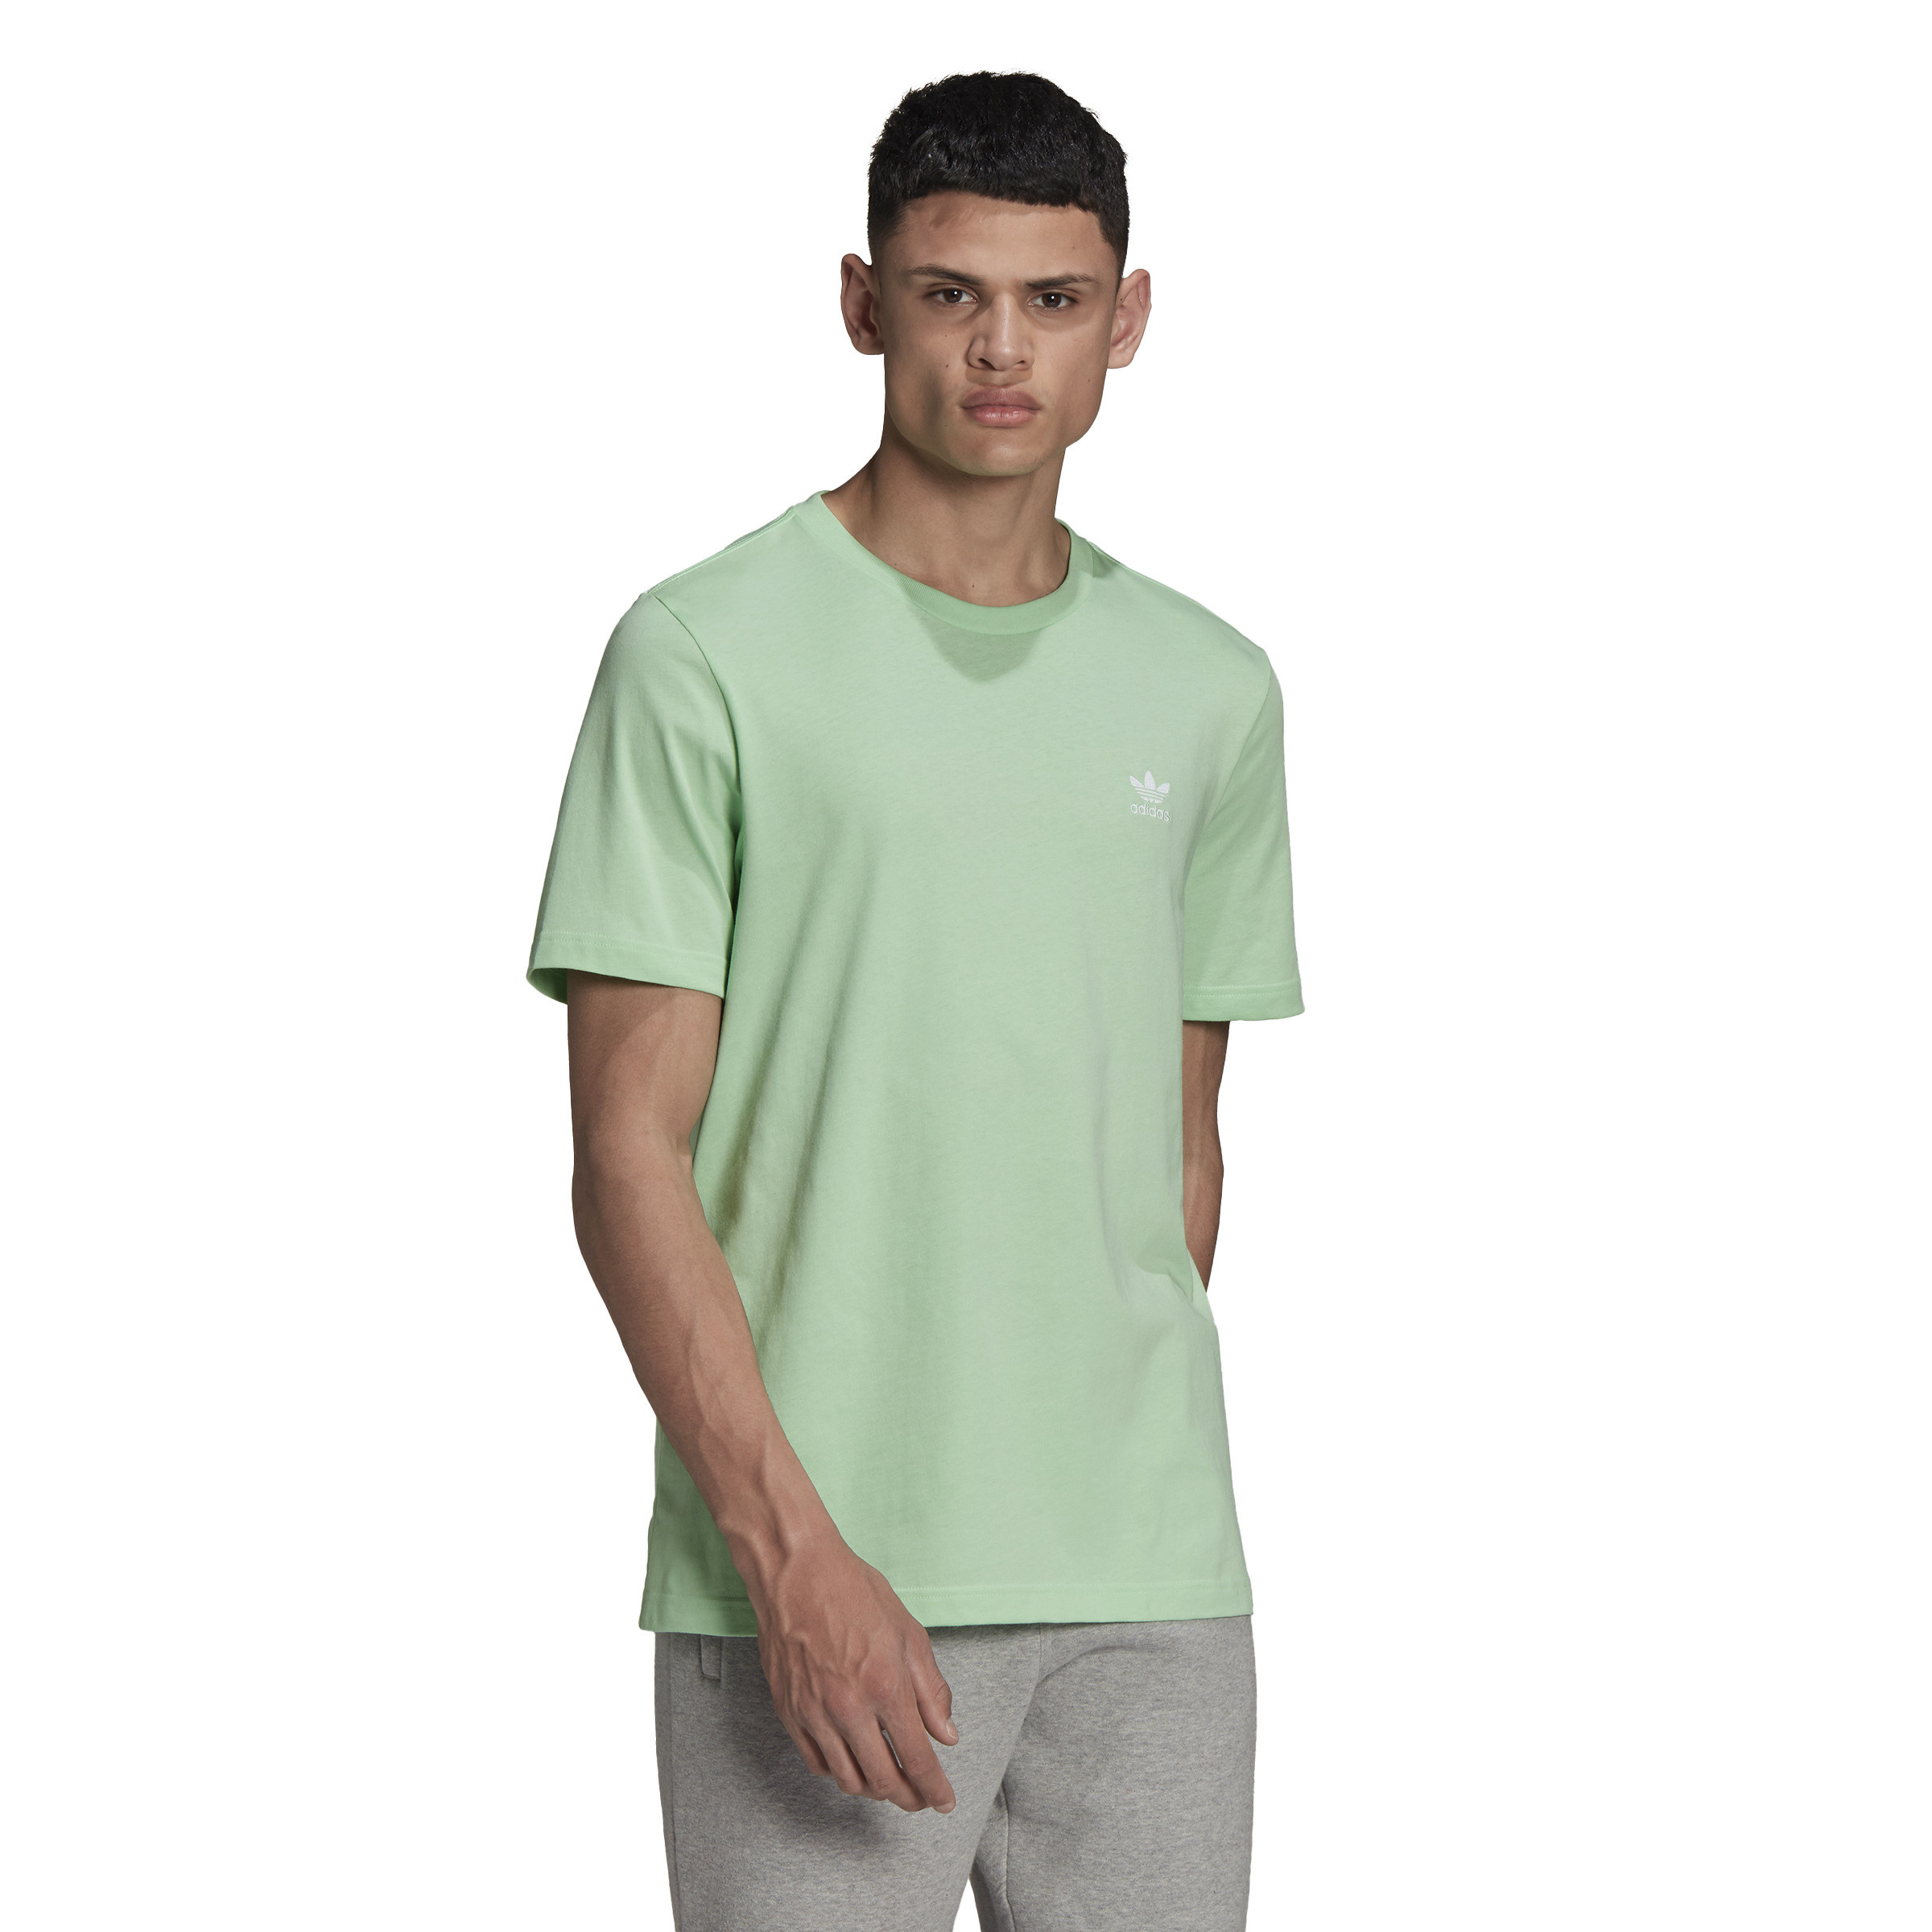 Adidas - Adicolor T-shirt with logo, Light Green, large image number 1